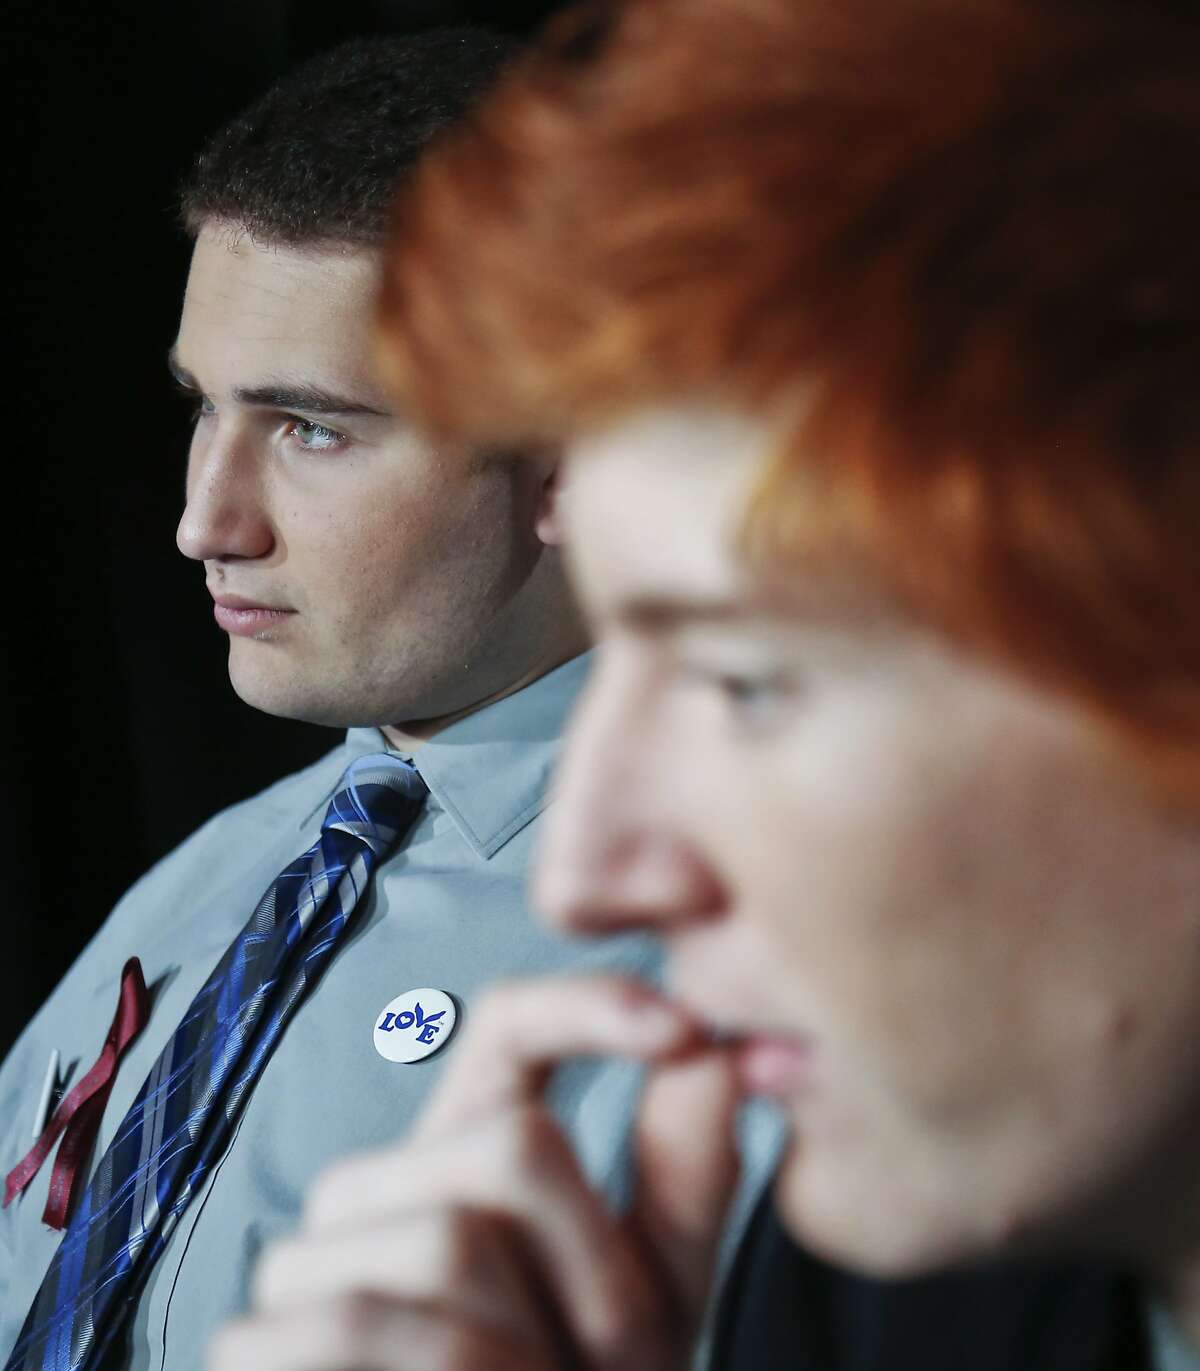 Ryan Deitsch, right, and Alex Wind, survivors from the shooting at Marjory Stoneman Douglas High School, pose during an interview, Monday, March 19, 2018, in New York. Hundreds of March for Our Lives demonstrations are planned around the world Saturday, sparked by the Feb. 14 shooting in Parkland, Fla. (AP Photo/Bebeto Matthews)